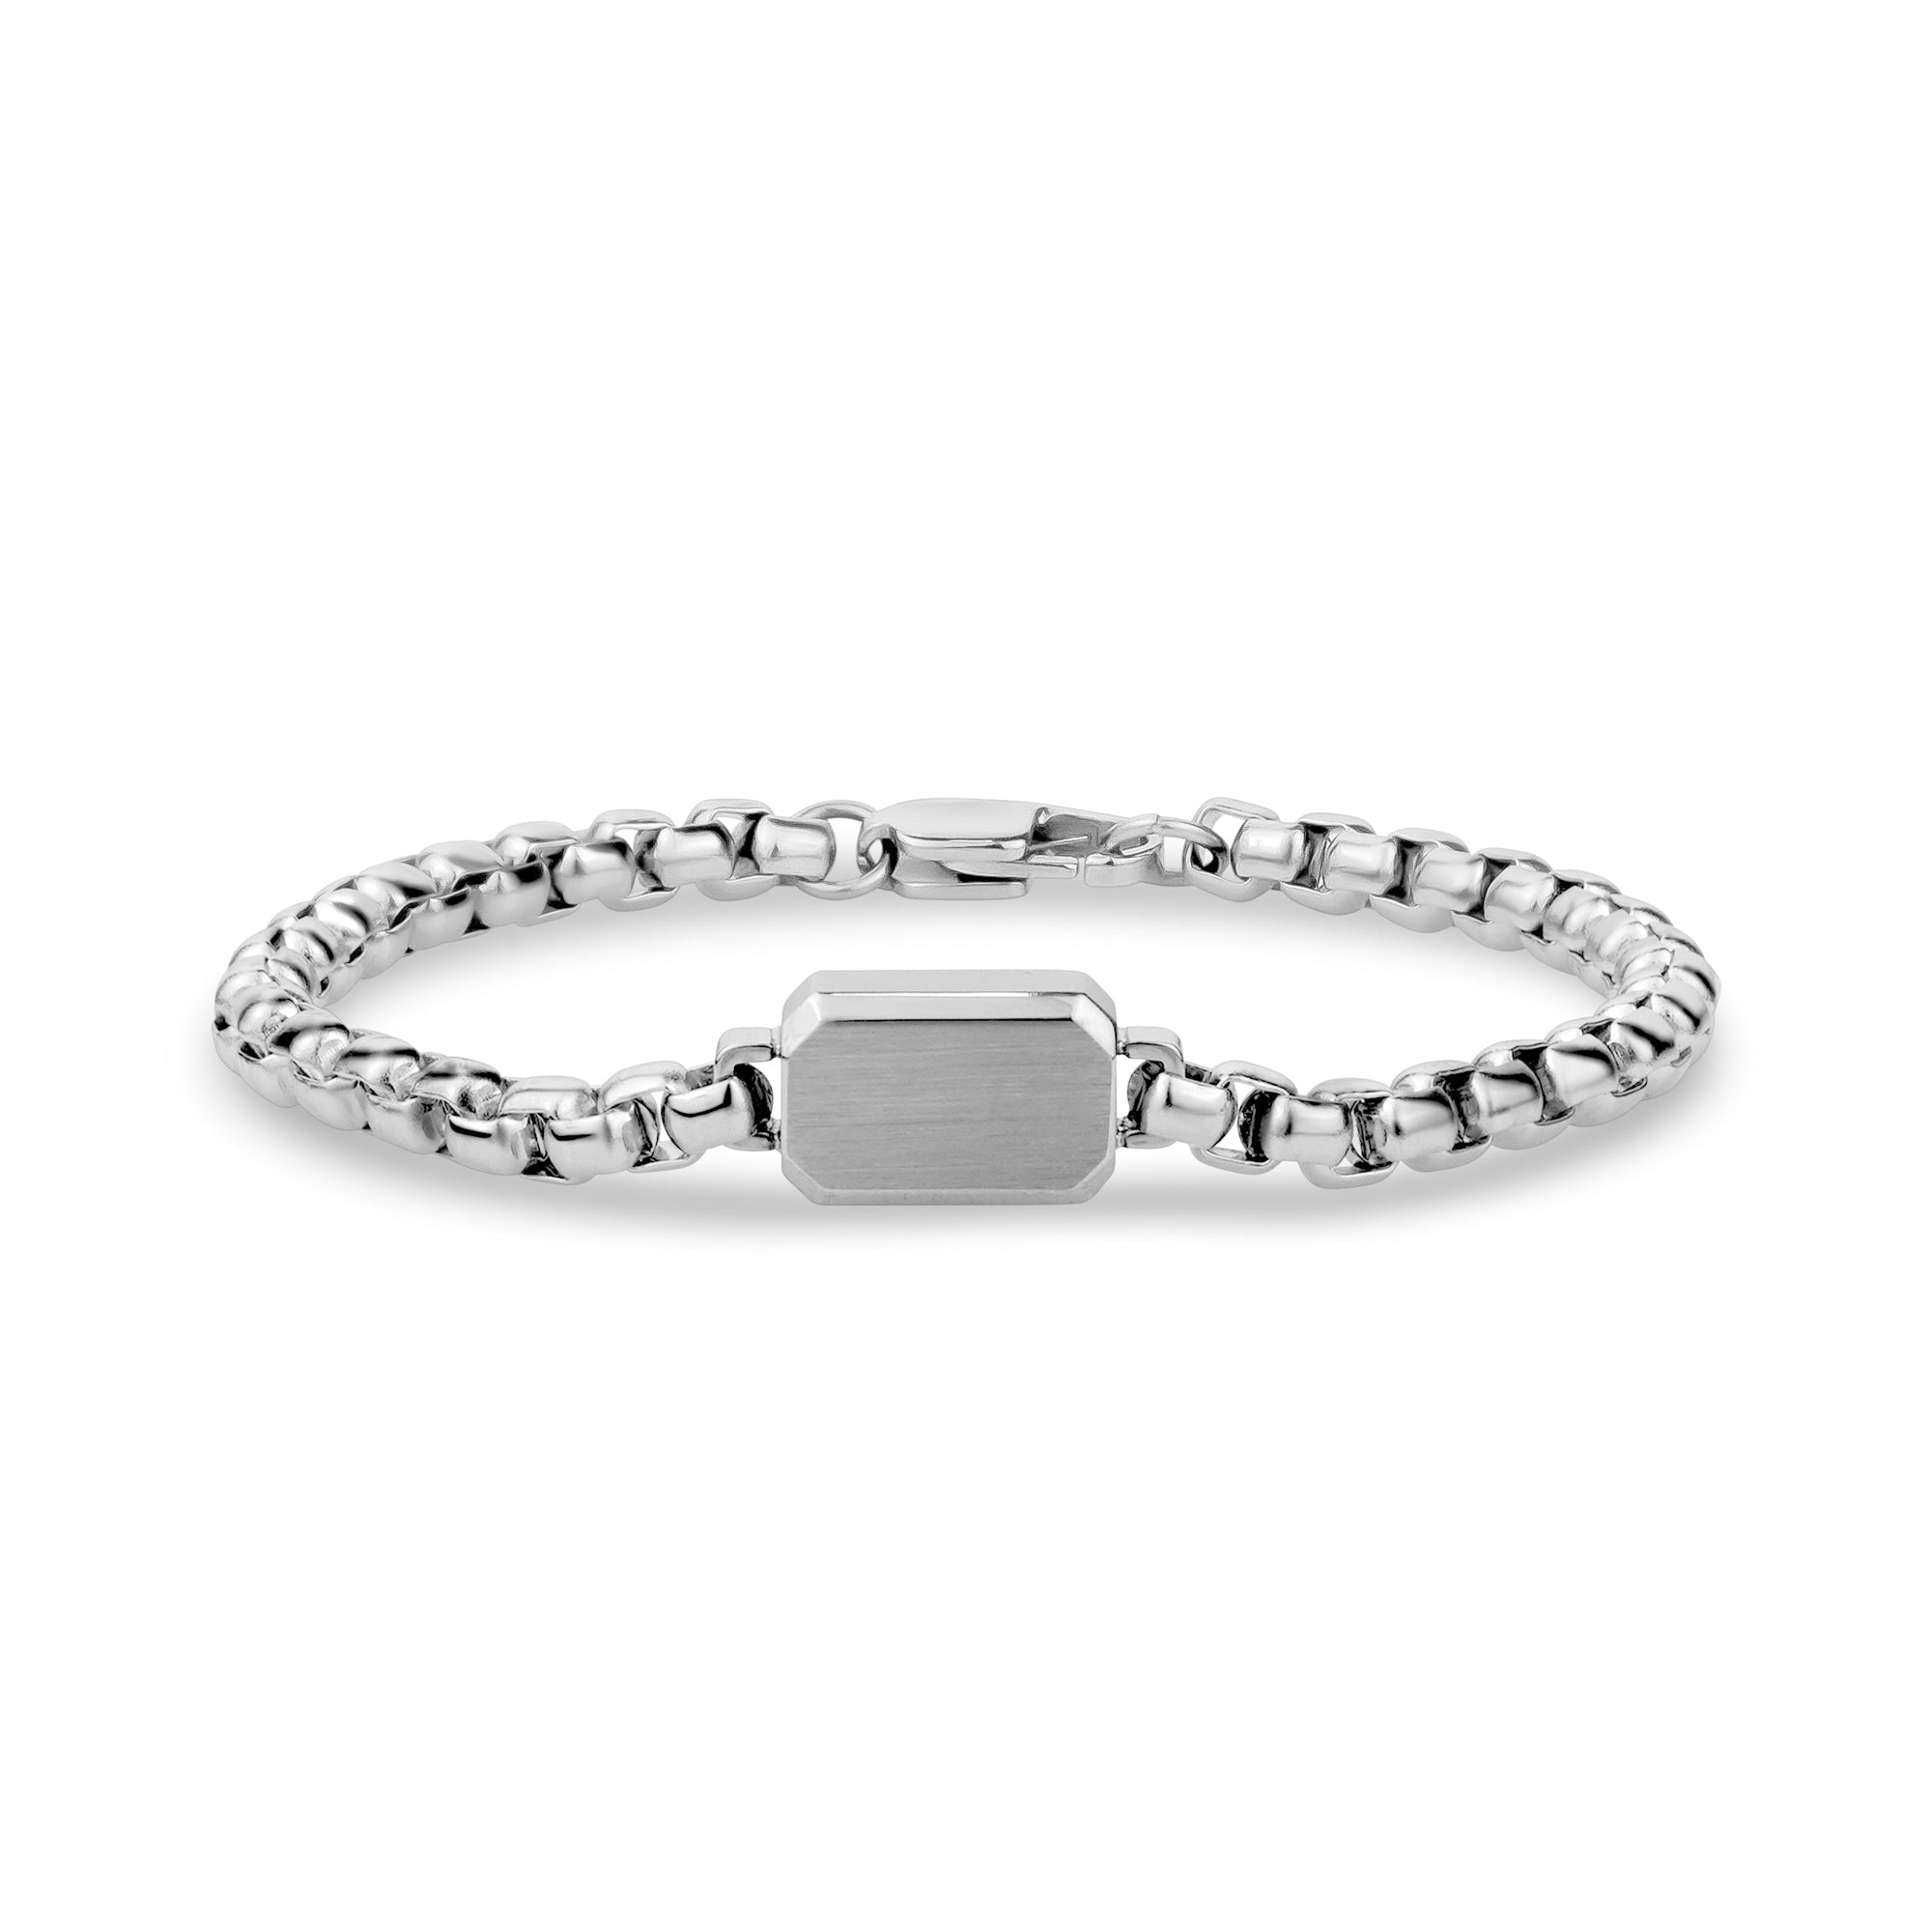 Mens Personalized Sterling Silver ID Bracelet – Be Monogrammed